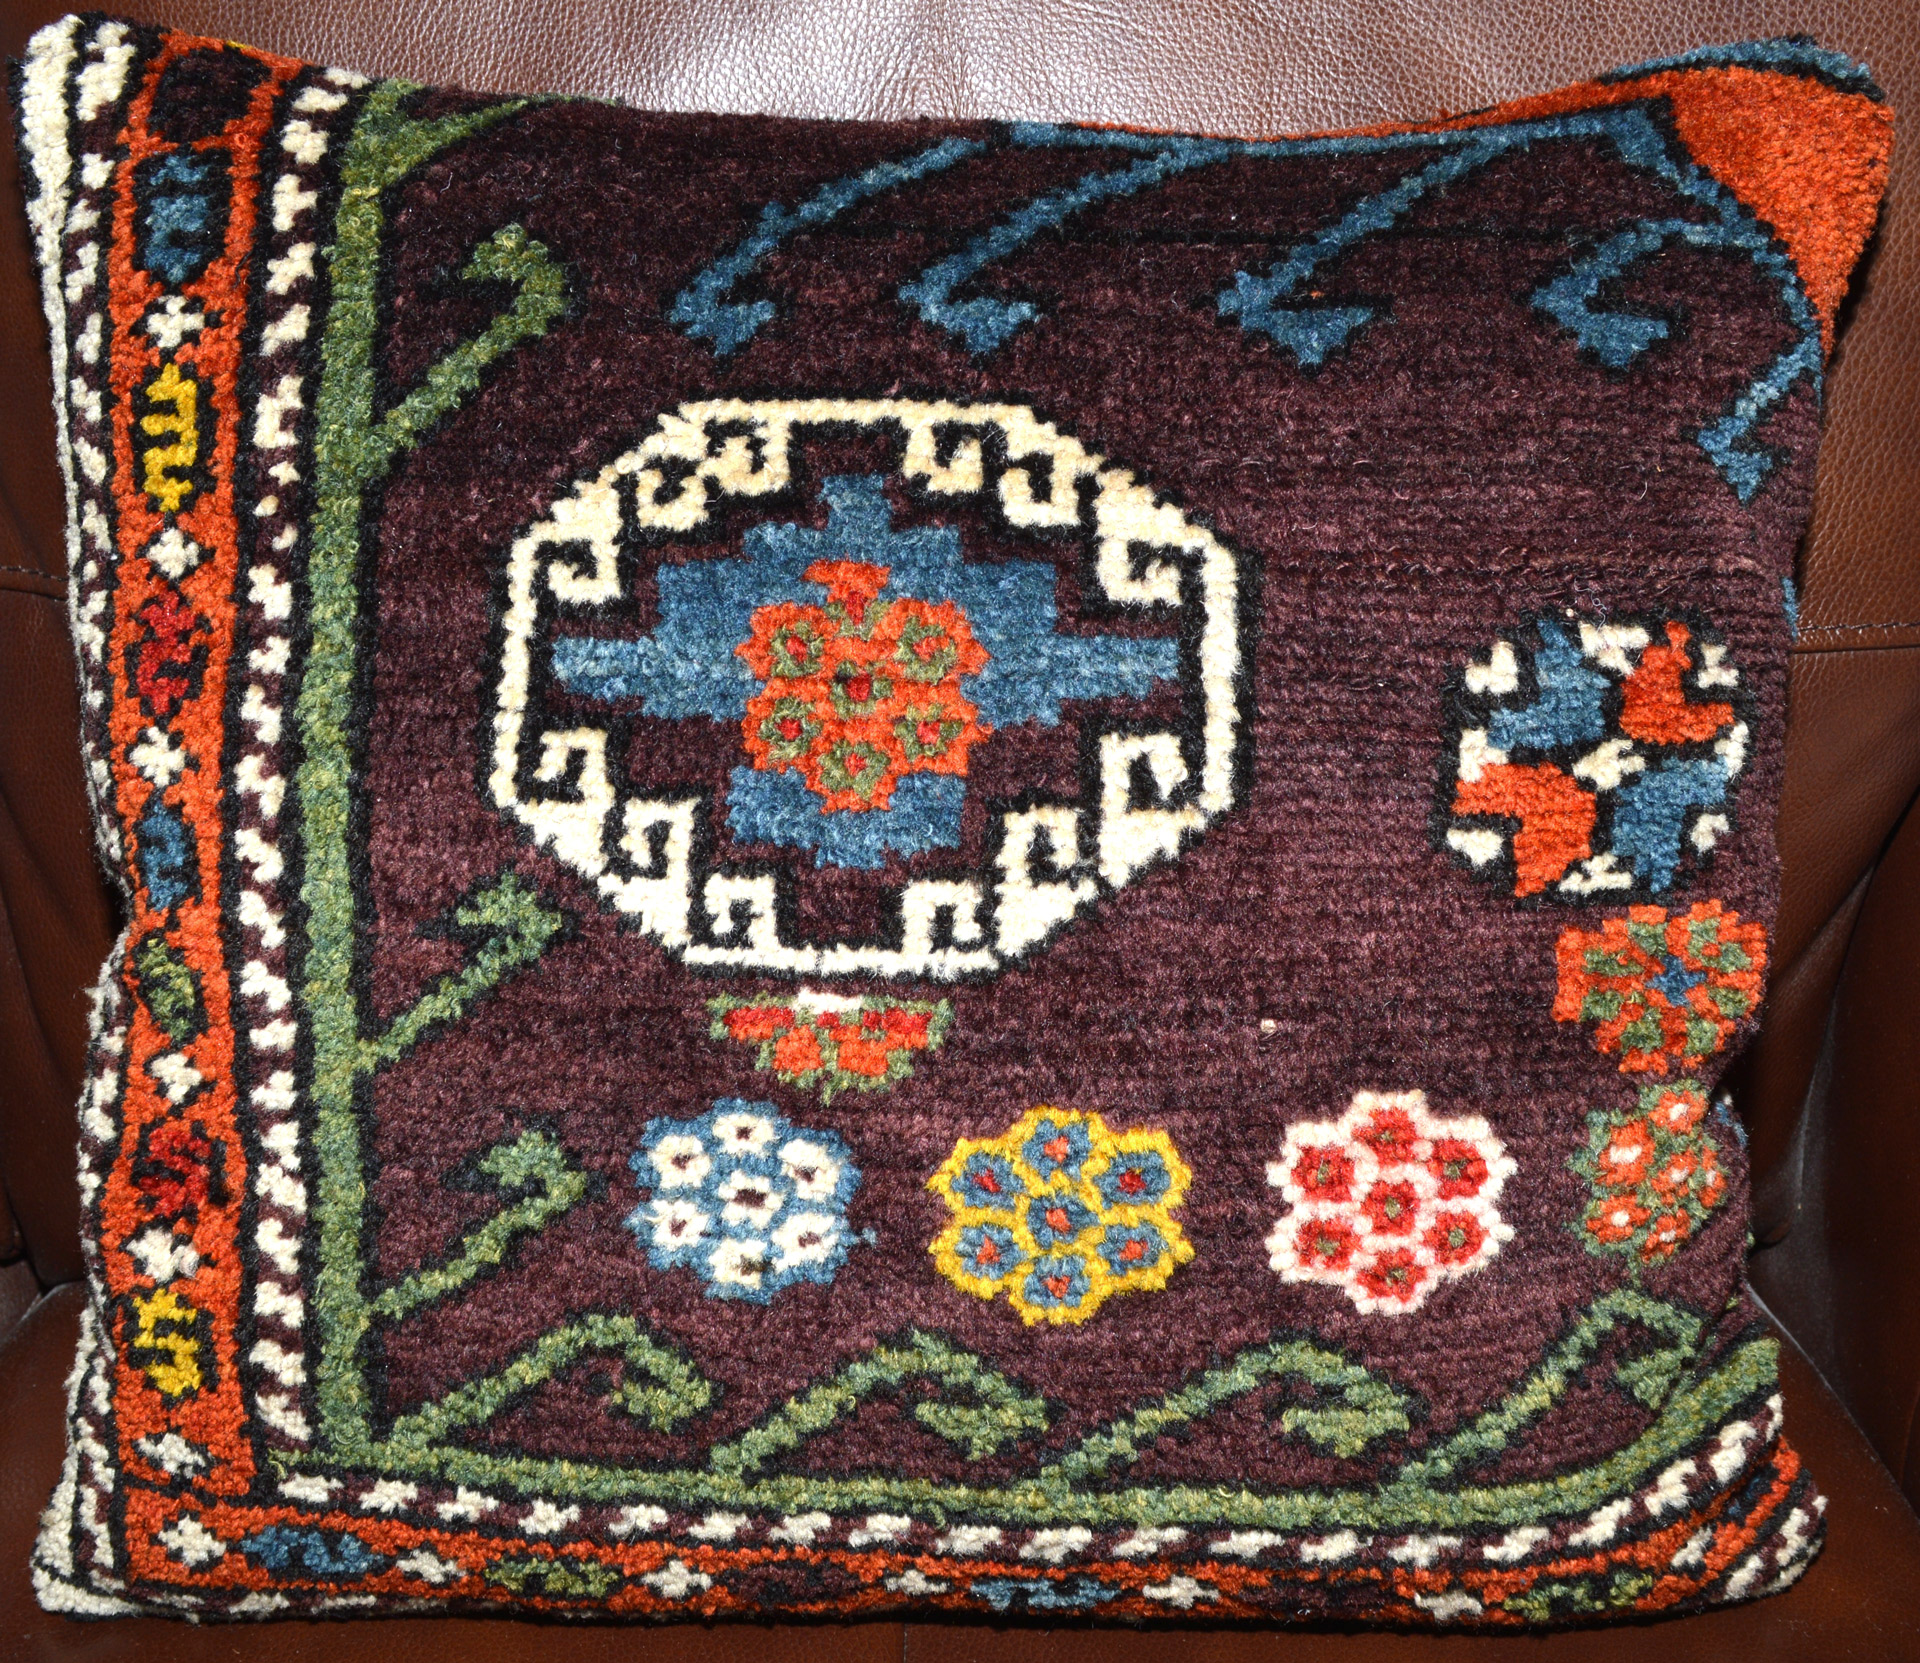 18" x 16" antique Turkish rug pillow made from a fragment of an antique Canakkale / Bergama rug, late 19th century. Douglas Stock Gallery offers a selection of antique Oriental rug pillow, antique rug cushions, Douglas Stock Gallery works with individual clients, architects and interior designers and is based in historic South Natick,MA in the Boston area. Antique rugs New England.